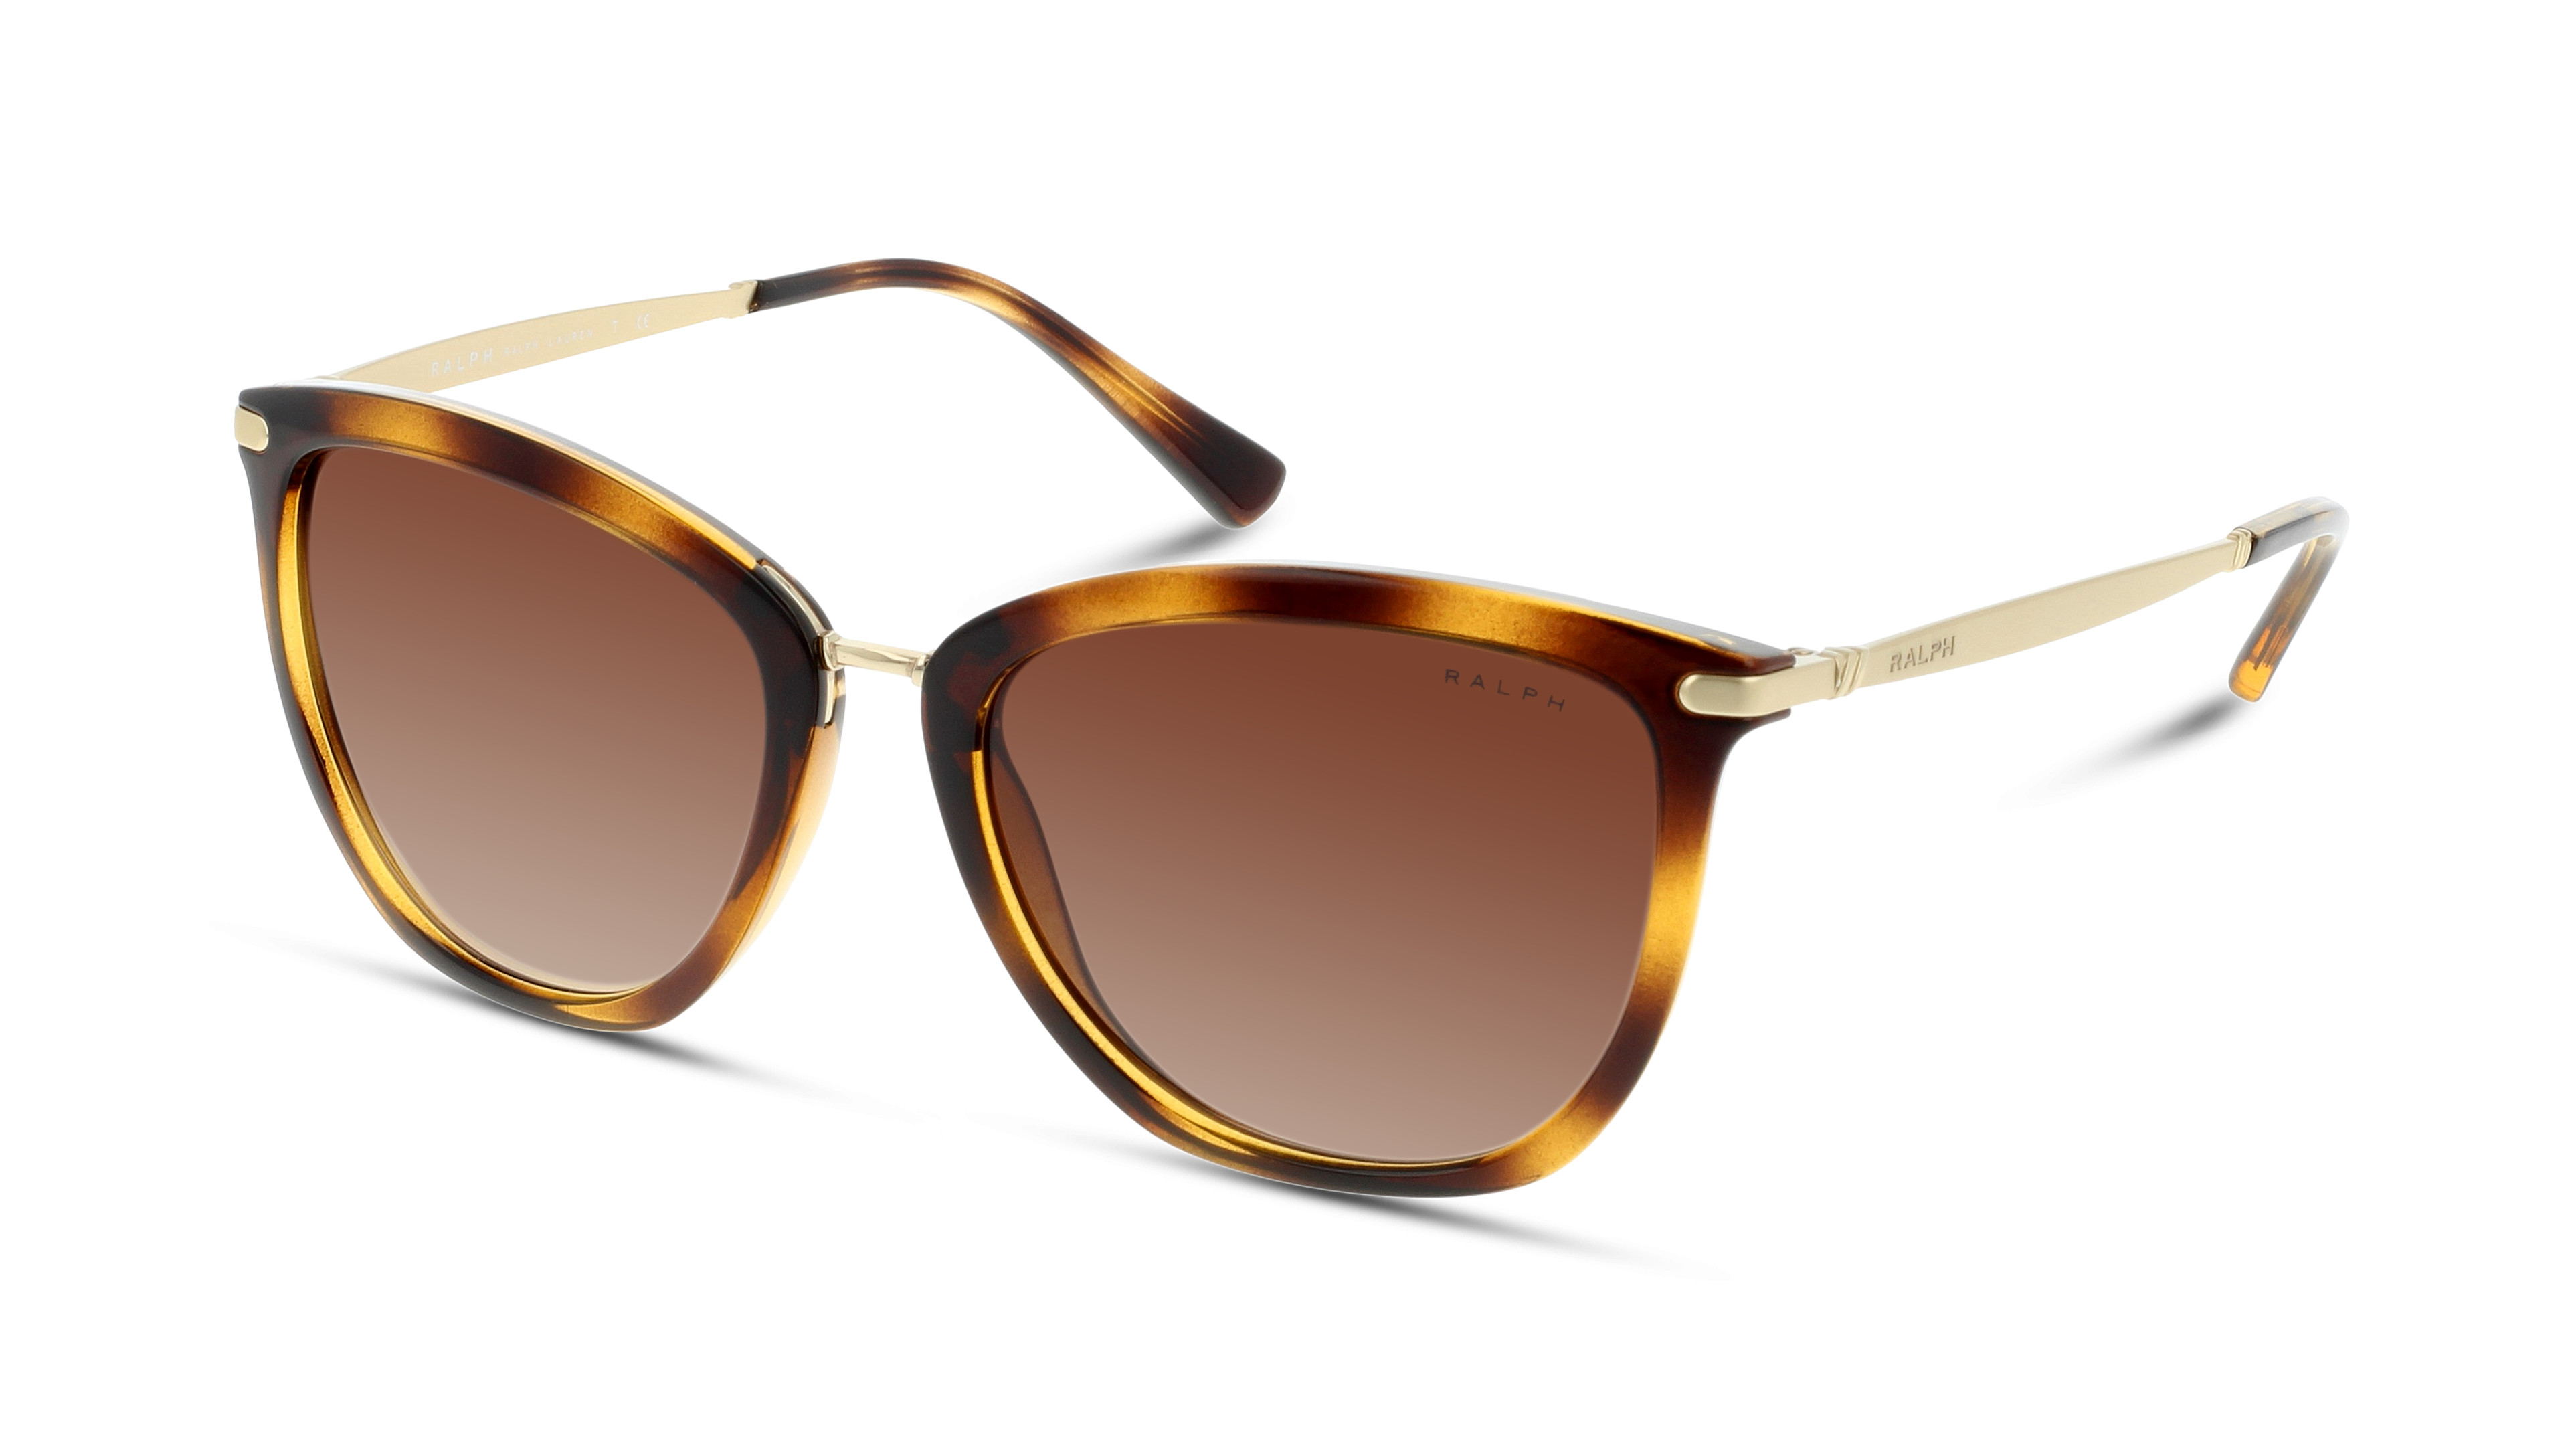 [products.image.angle_left01] Ralph Lauren 0RA5245 500313 Sonnenbrille